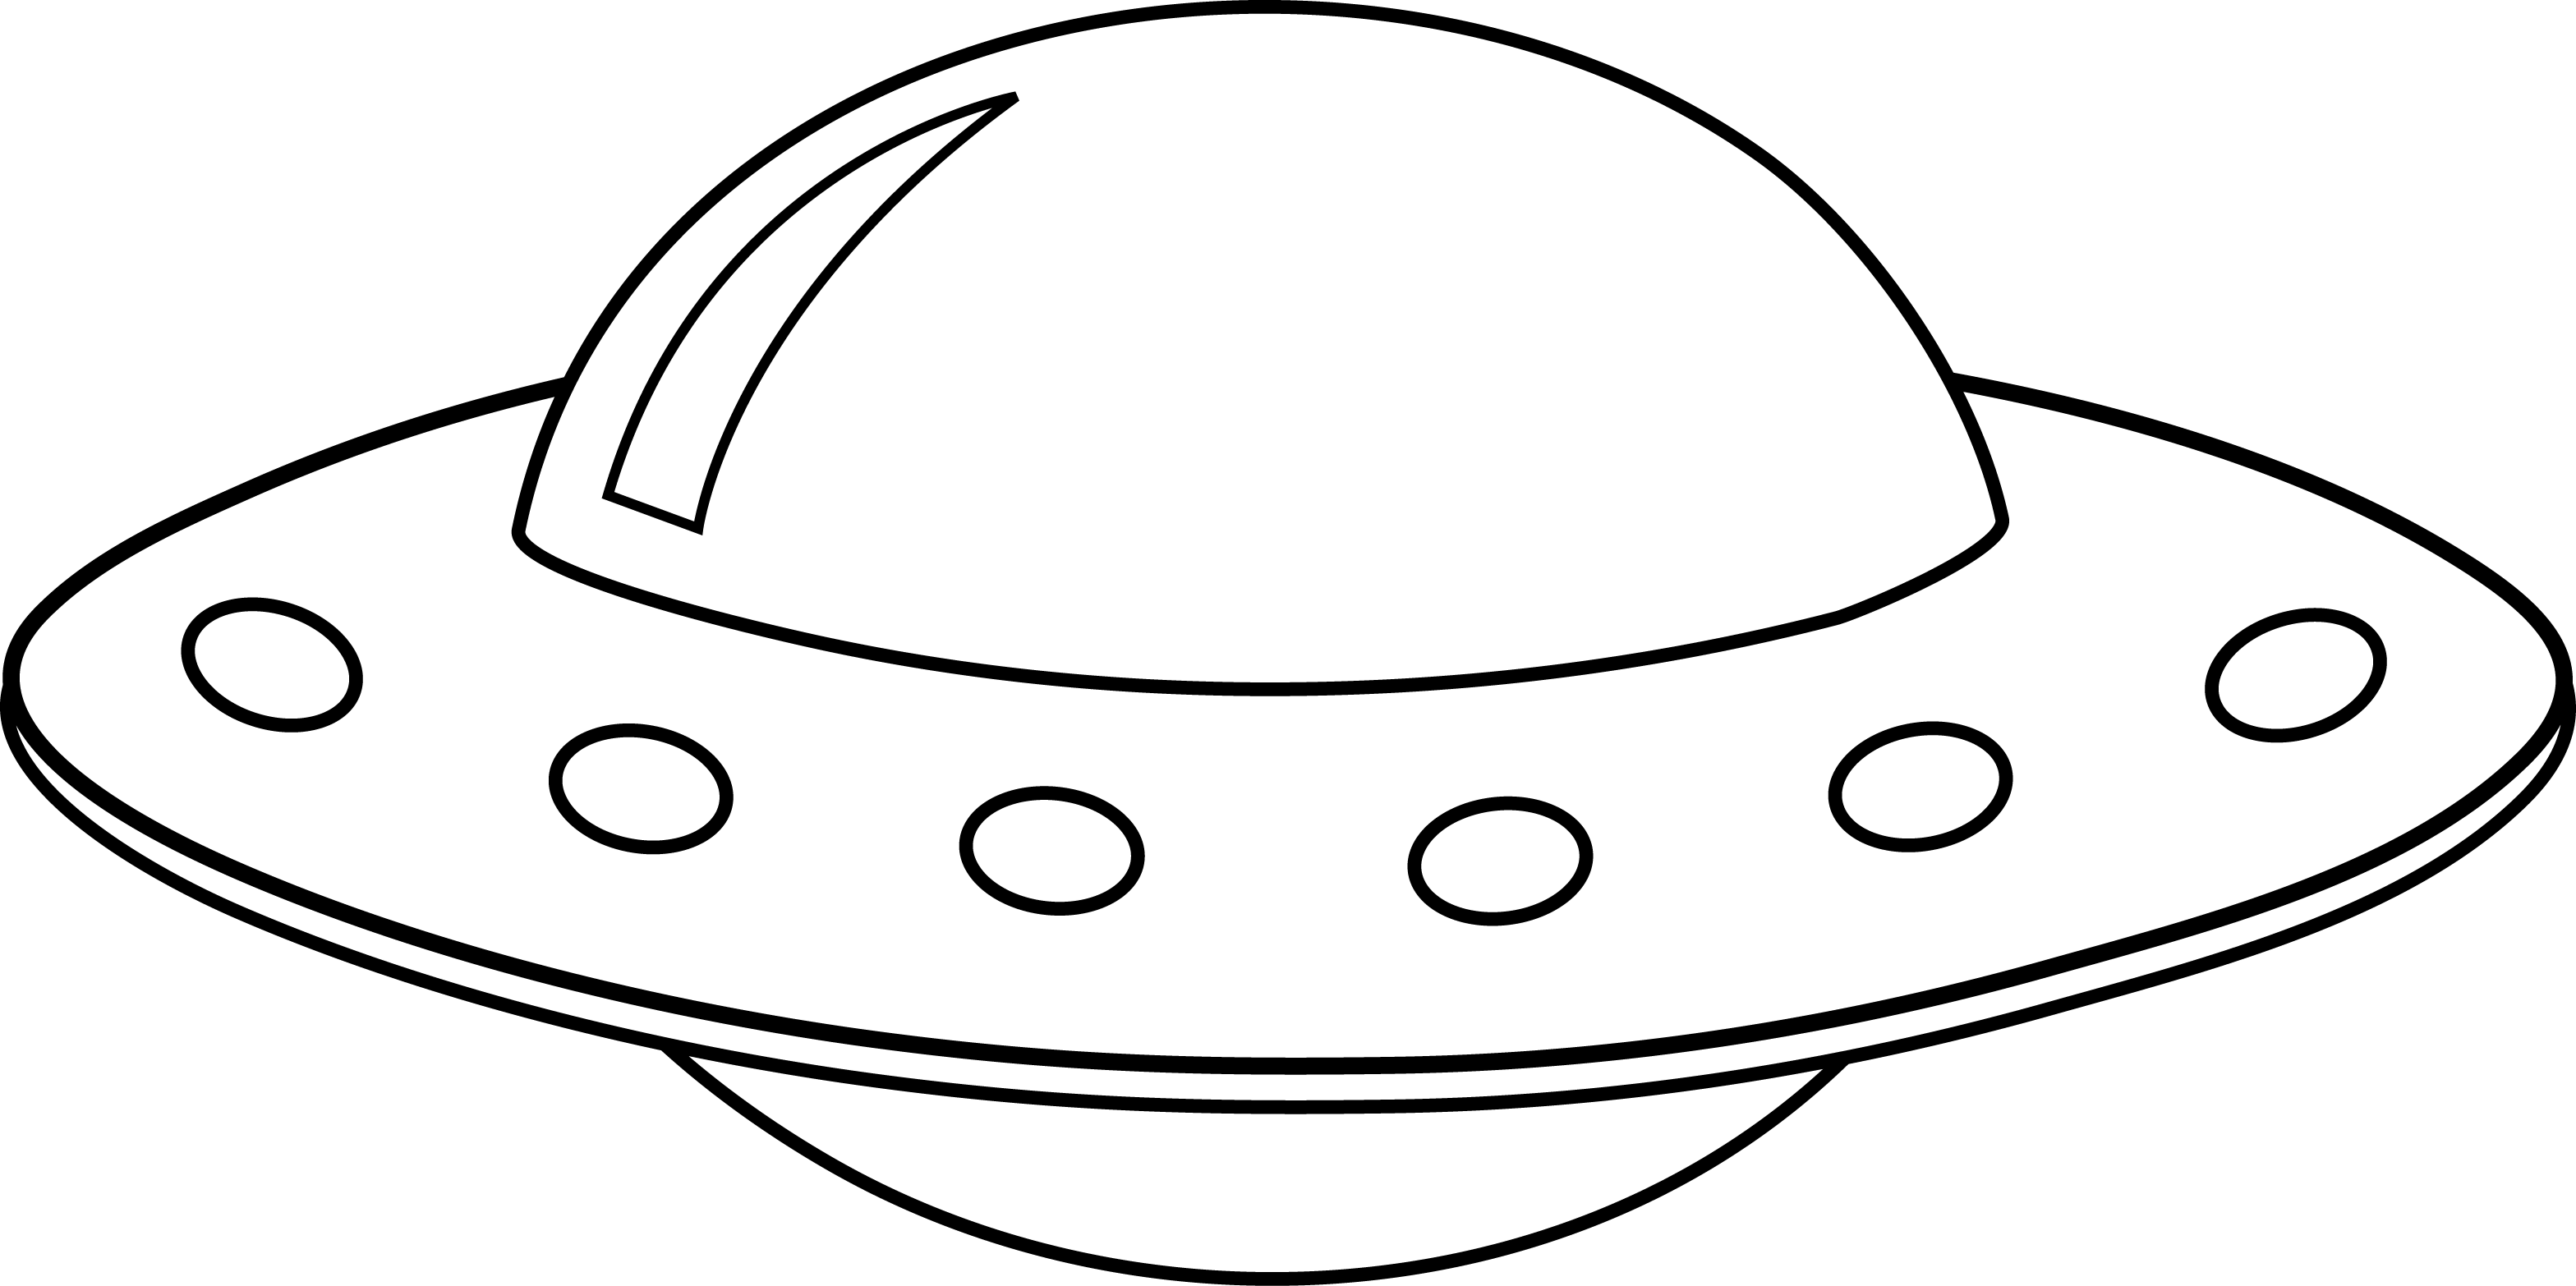 Alien Spaceship Clipart Black And White Images & Pictures - Becuo